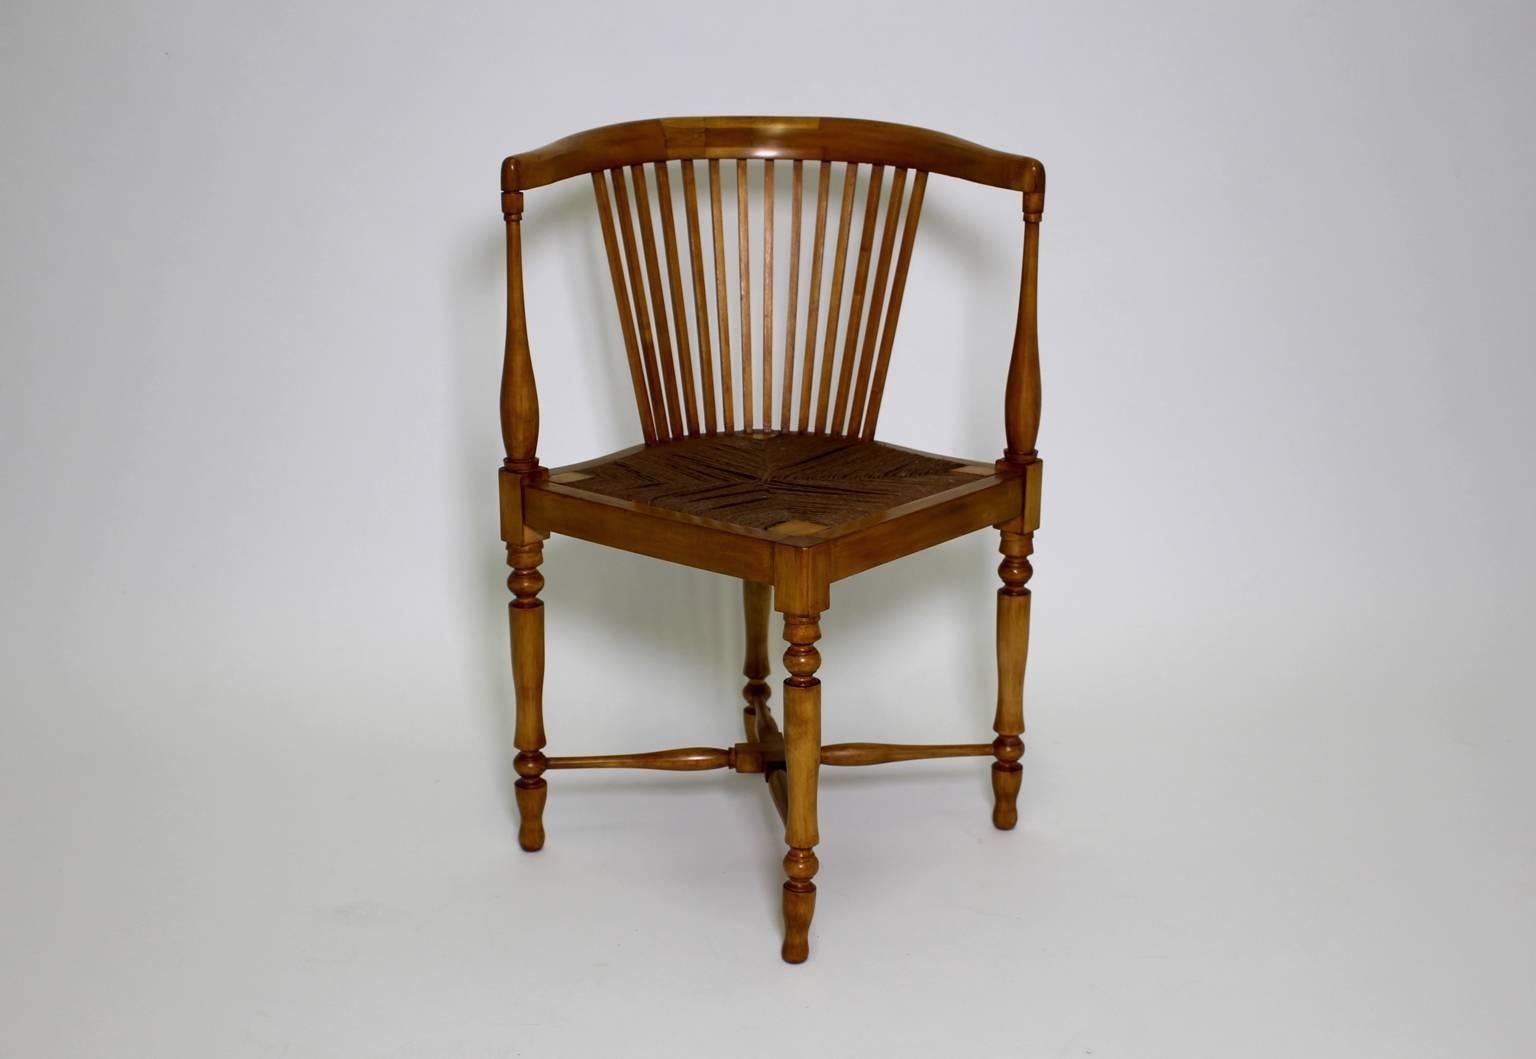 Jugendstil vintage corner chair from maple tree by Adolf Loos and executed by F.O.Schmidt.
The corner chair features solid shellac polished maple tree in honey brown color tone.
The network seat shows the original string, while the feet are